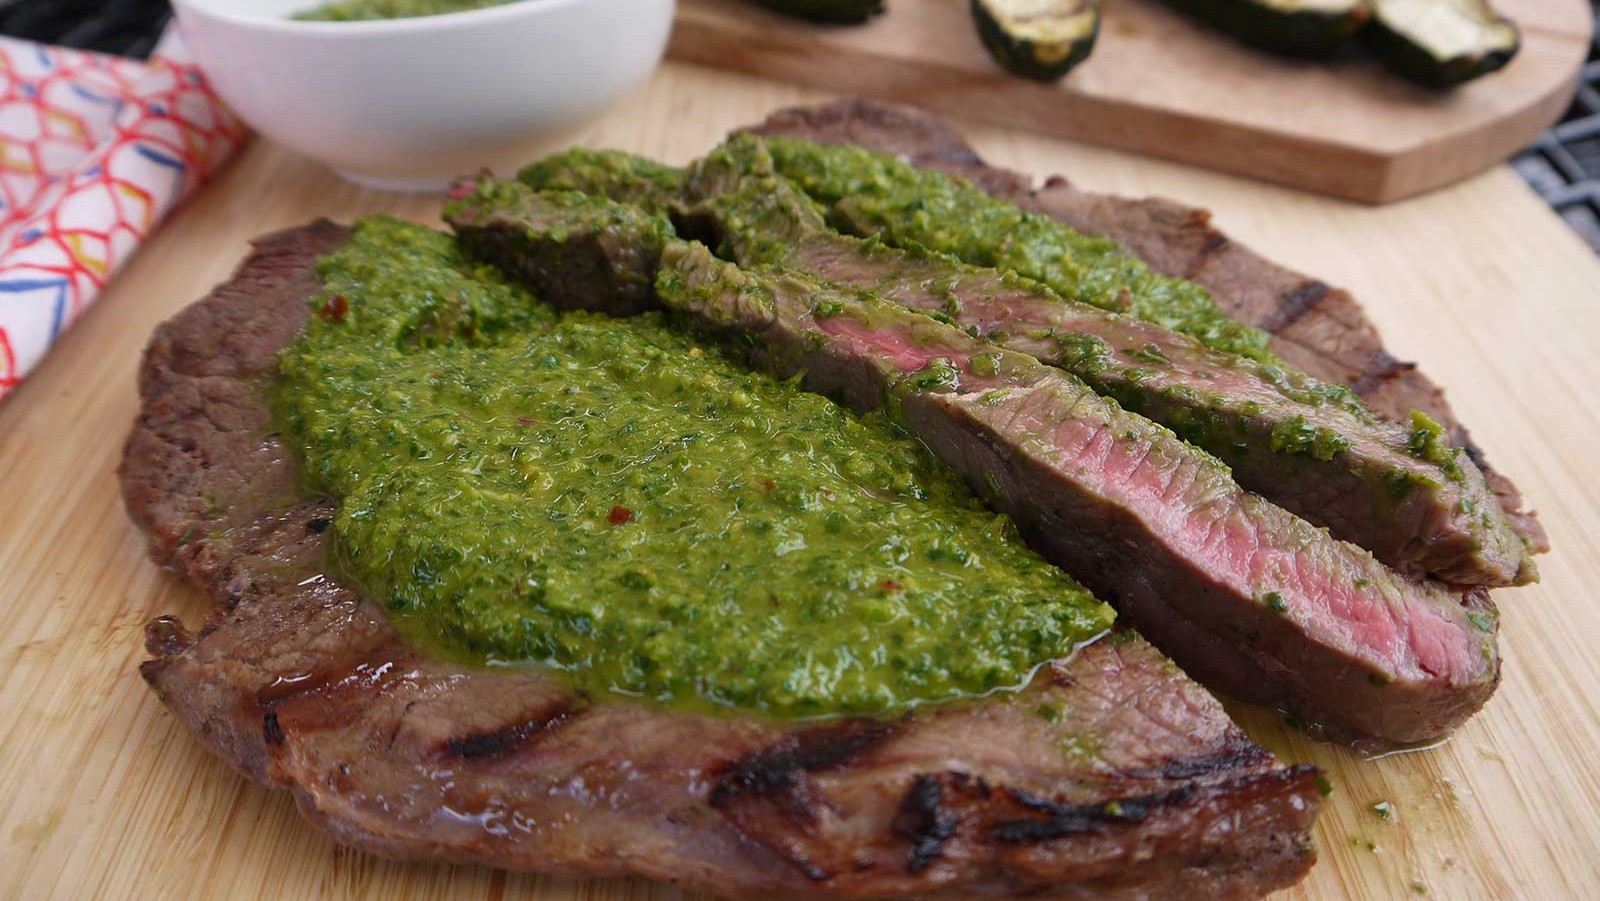 Image of Grilled Steak with Tangy Chimichurri Sauce